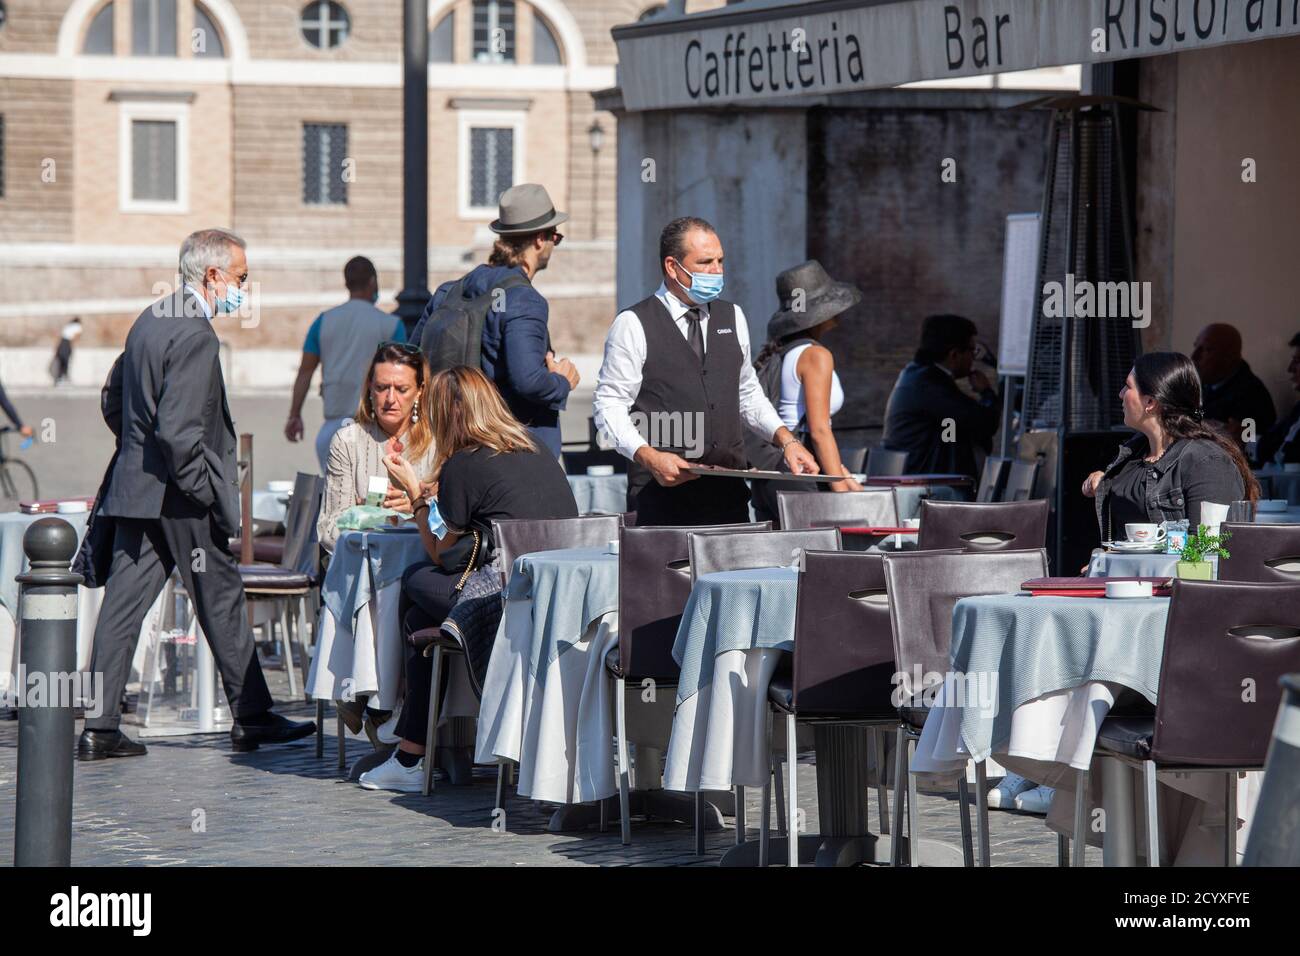 ROME, ITALY - OCTOBER 01 2020: Customers sit at a restaurant in Rome. Italy's economy is forecast to shrink 9% this year. Stock Photo